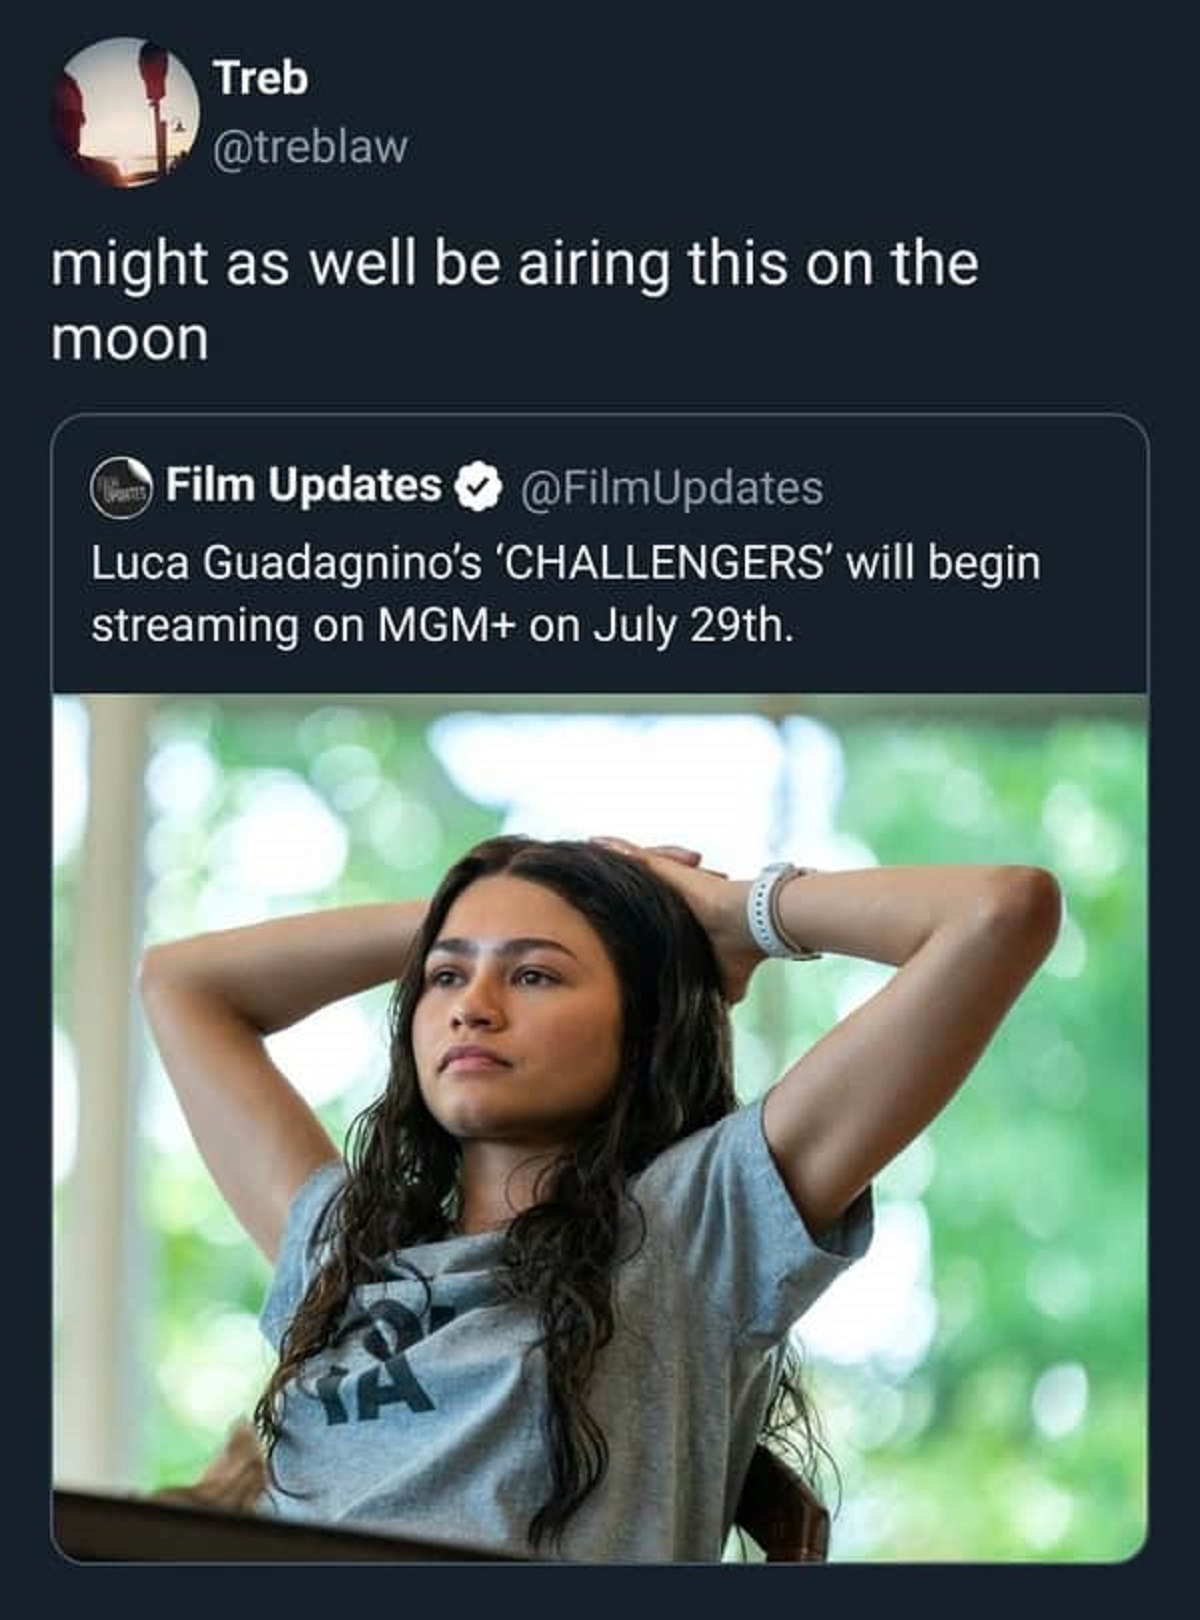 zendaya challengers - Treb might as well be airing this on the moon Film Updates Luca Guadagnino's 'Challengers' will begin streaming on Mgm on July 29th.